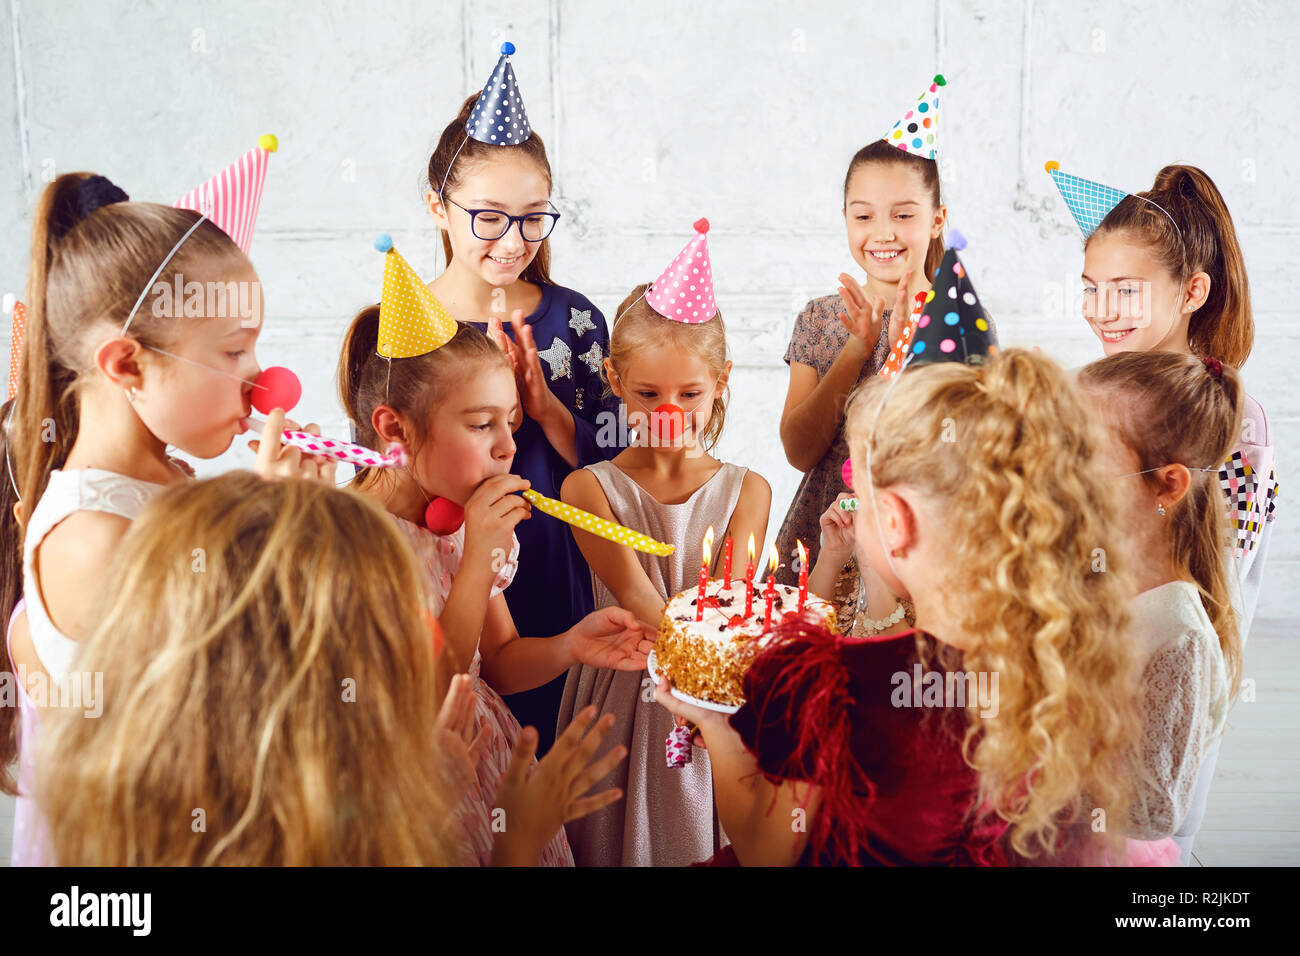 Children with a birthday cake have fun. Stock Photo